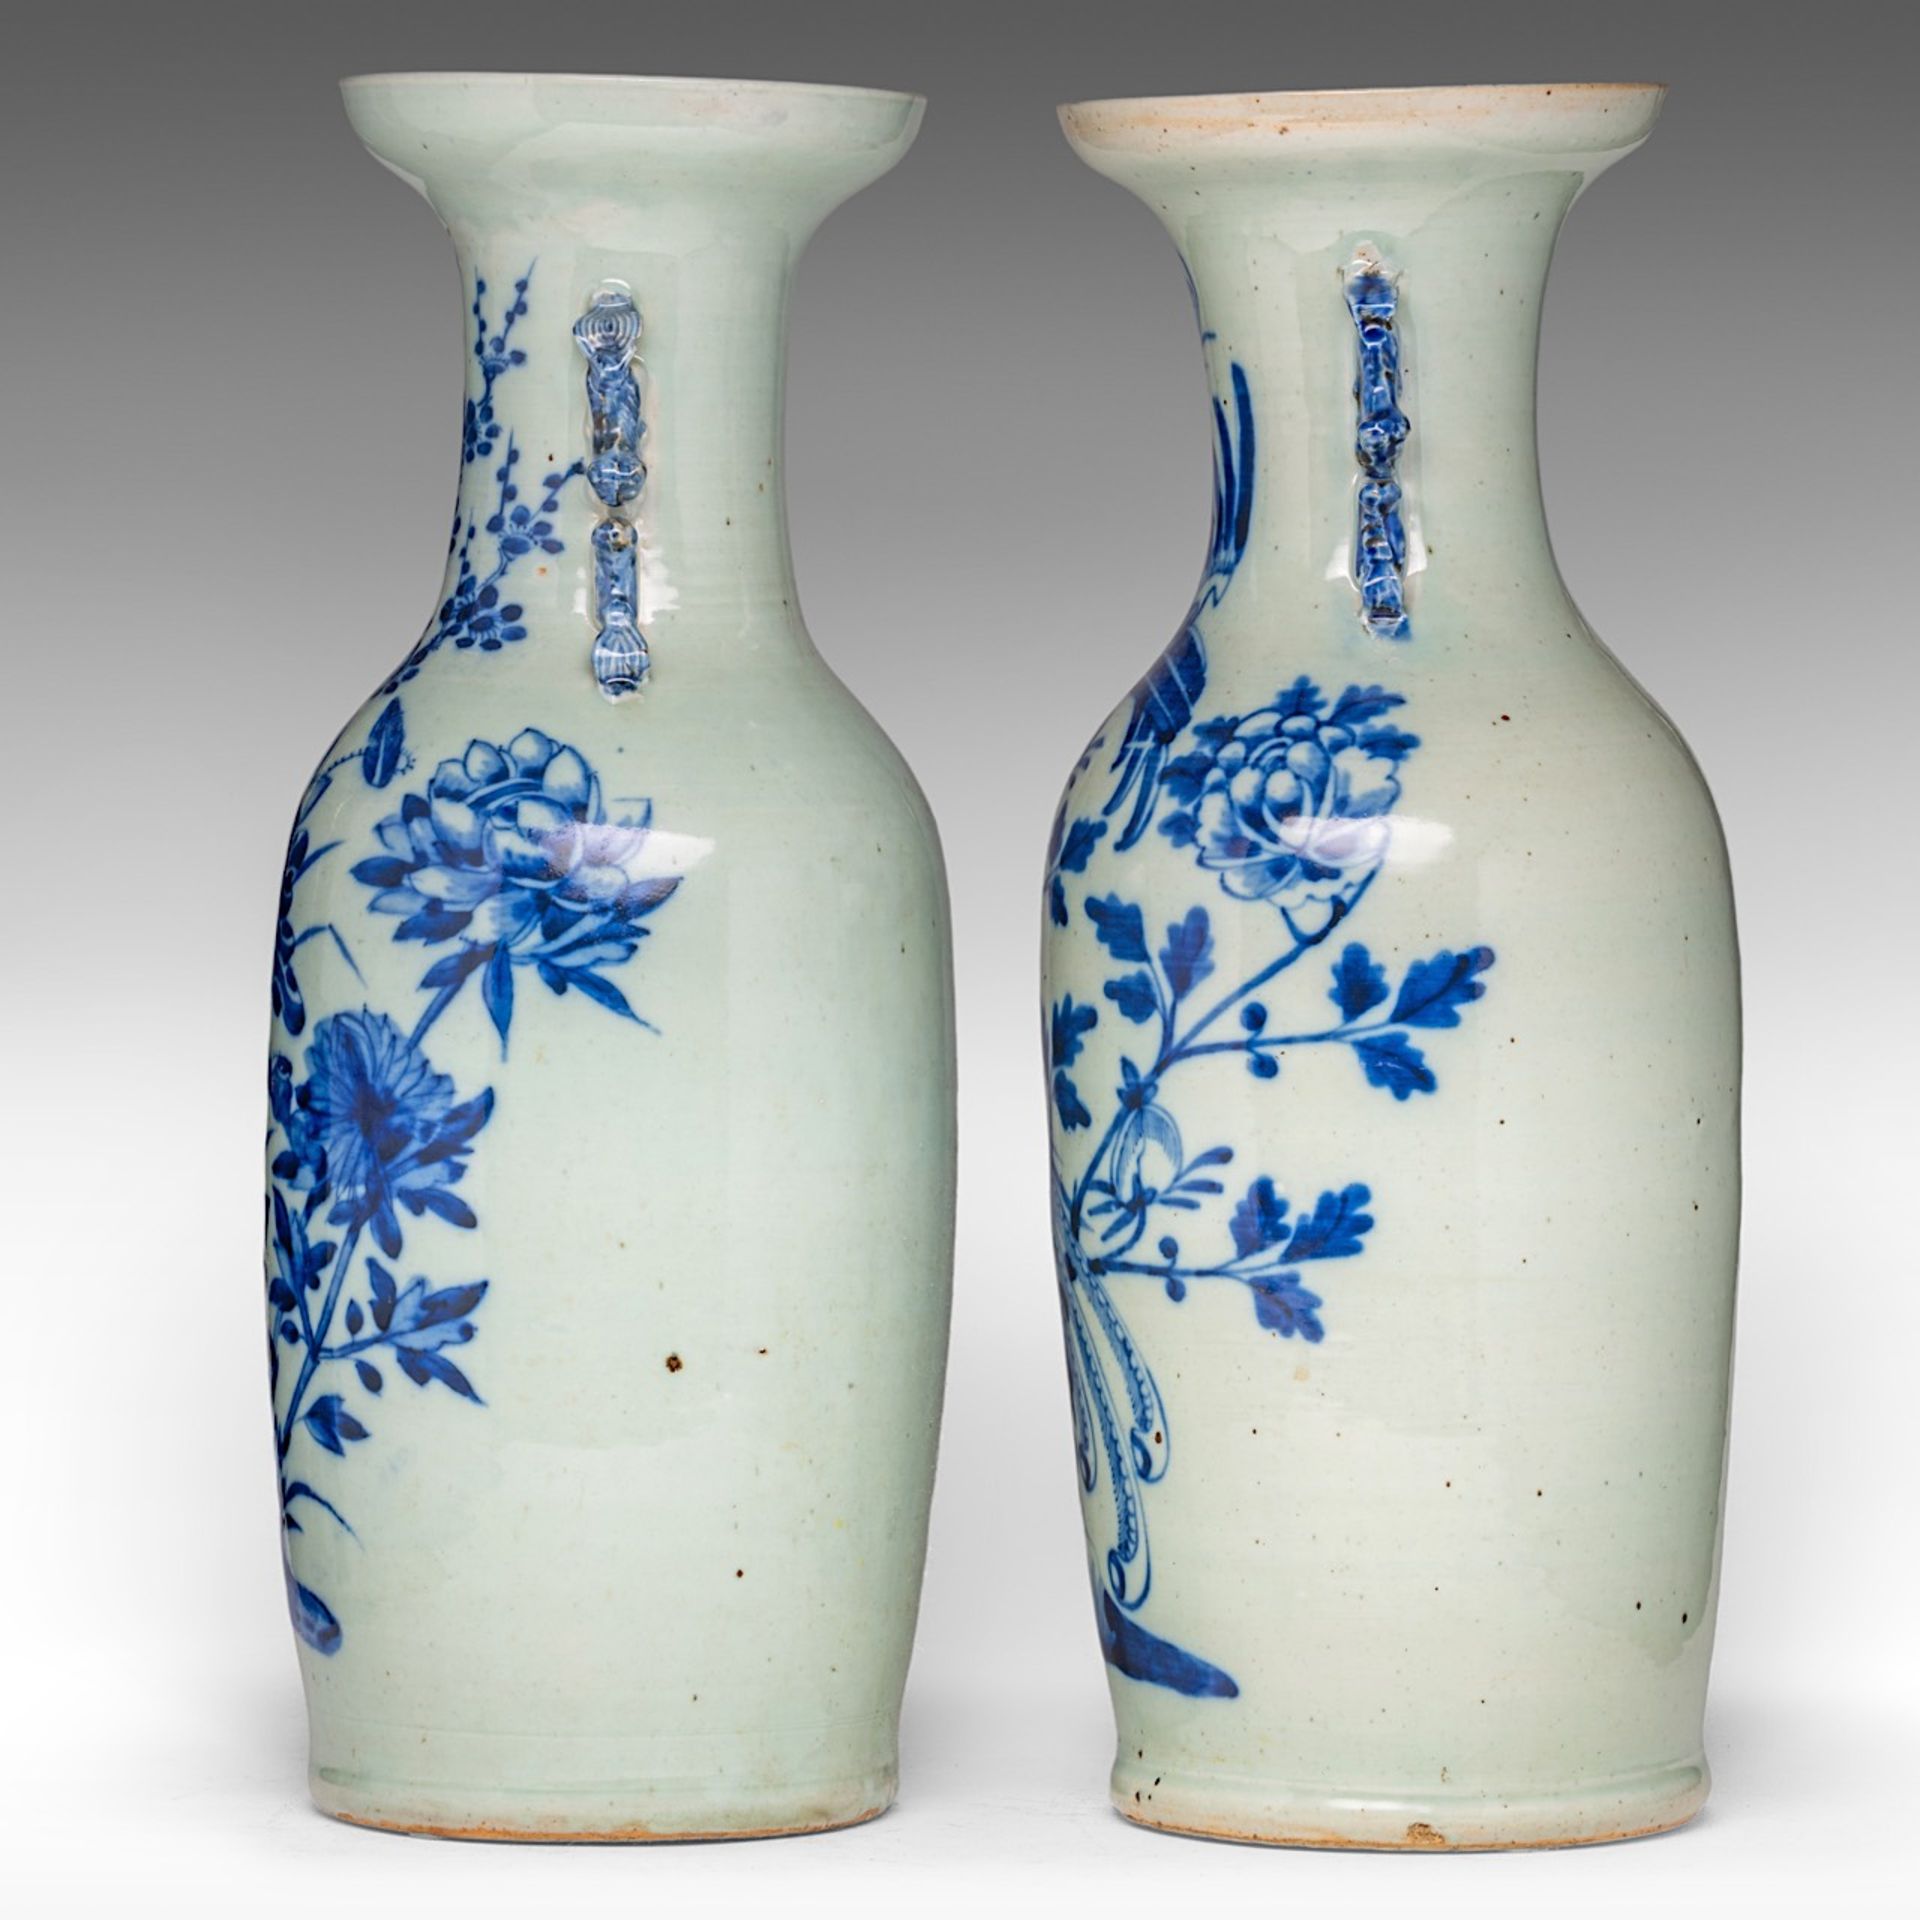 Four Chinese blue and white on celadon ground 'Flowers and birds' vases, late 19thC, H 57 - 58 cm - Image 3 of 13